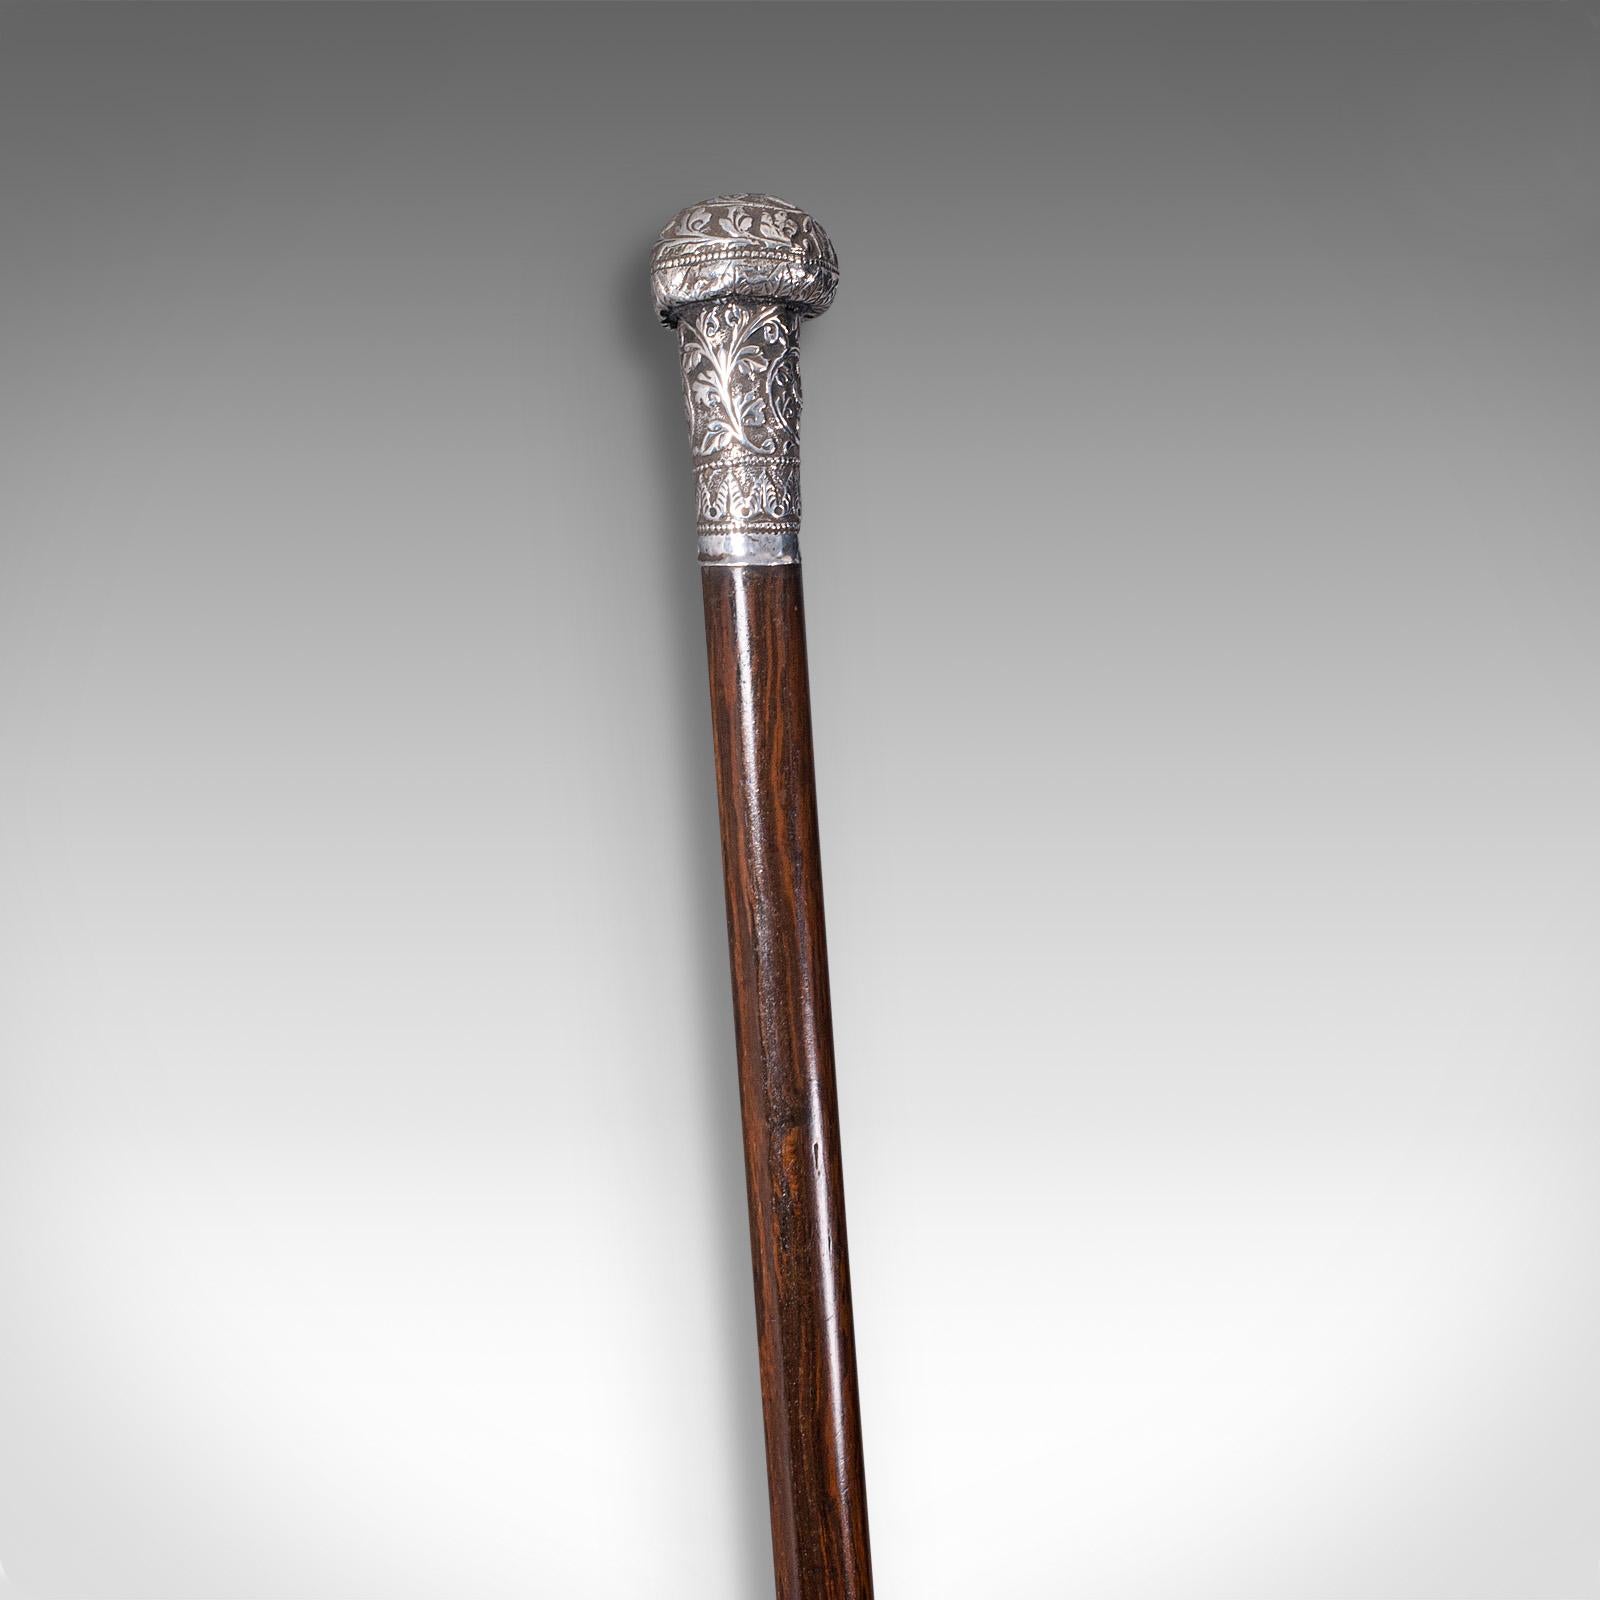 Unknown Antique Colonial Walking Cane, Anglo Indian, Coromandel, Swagger Stick, Georgian